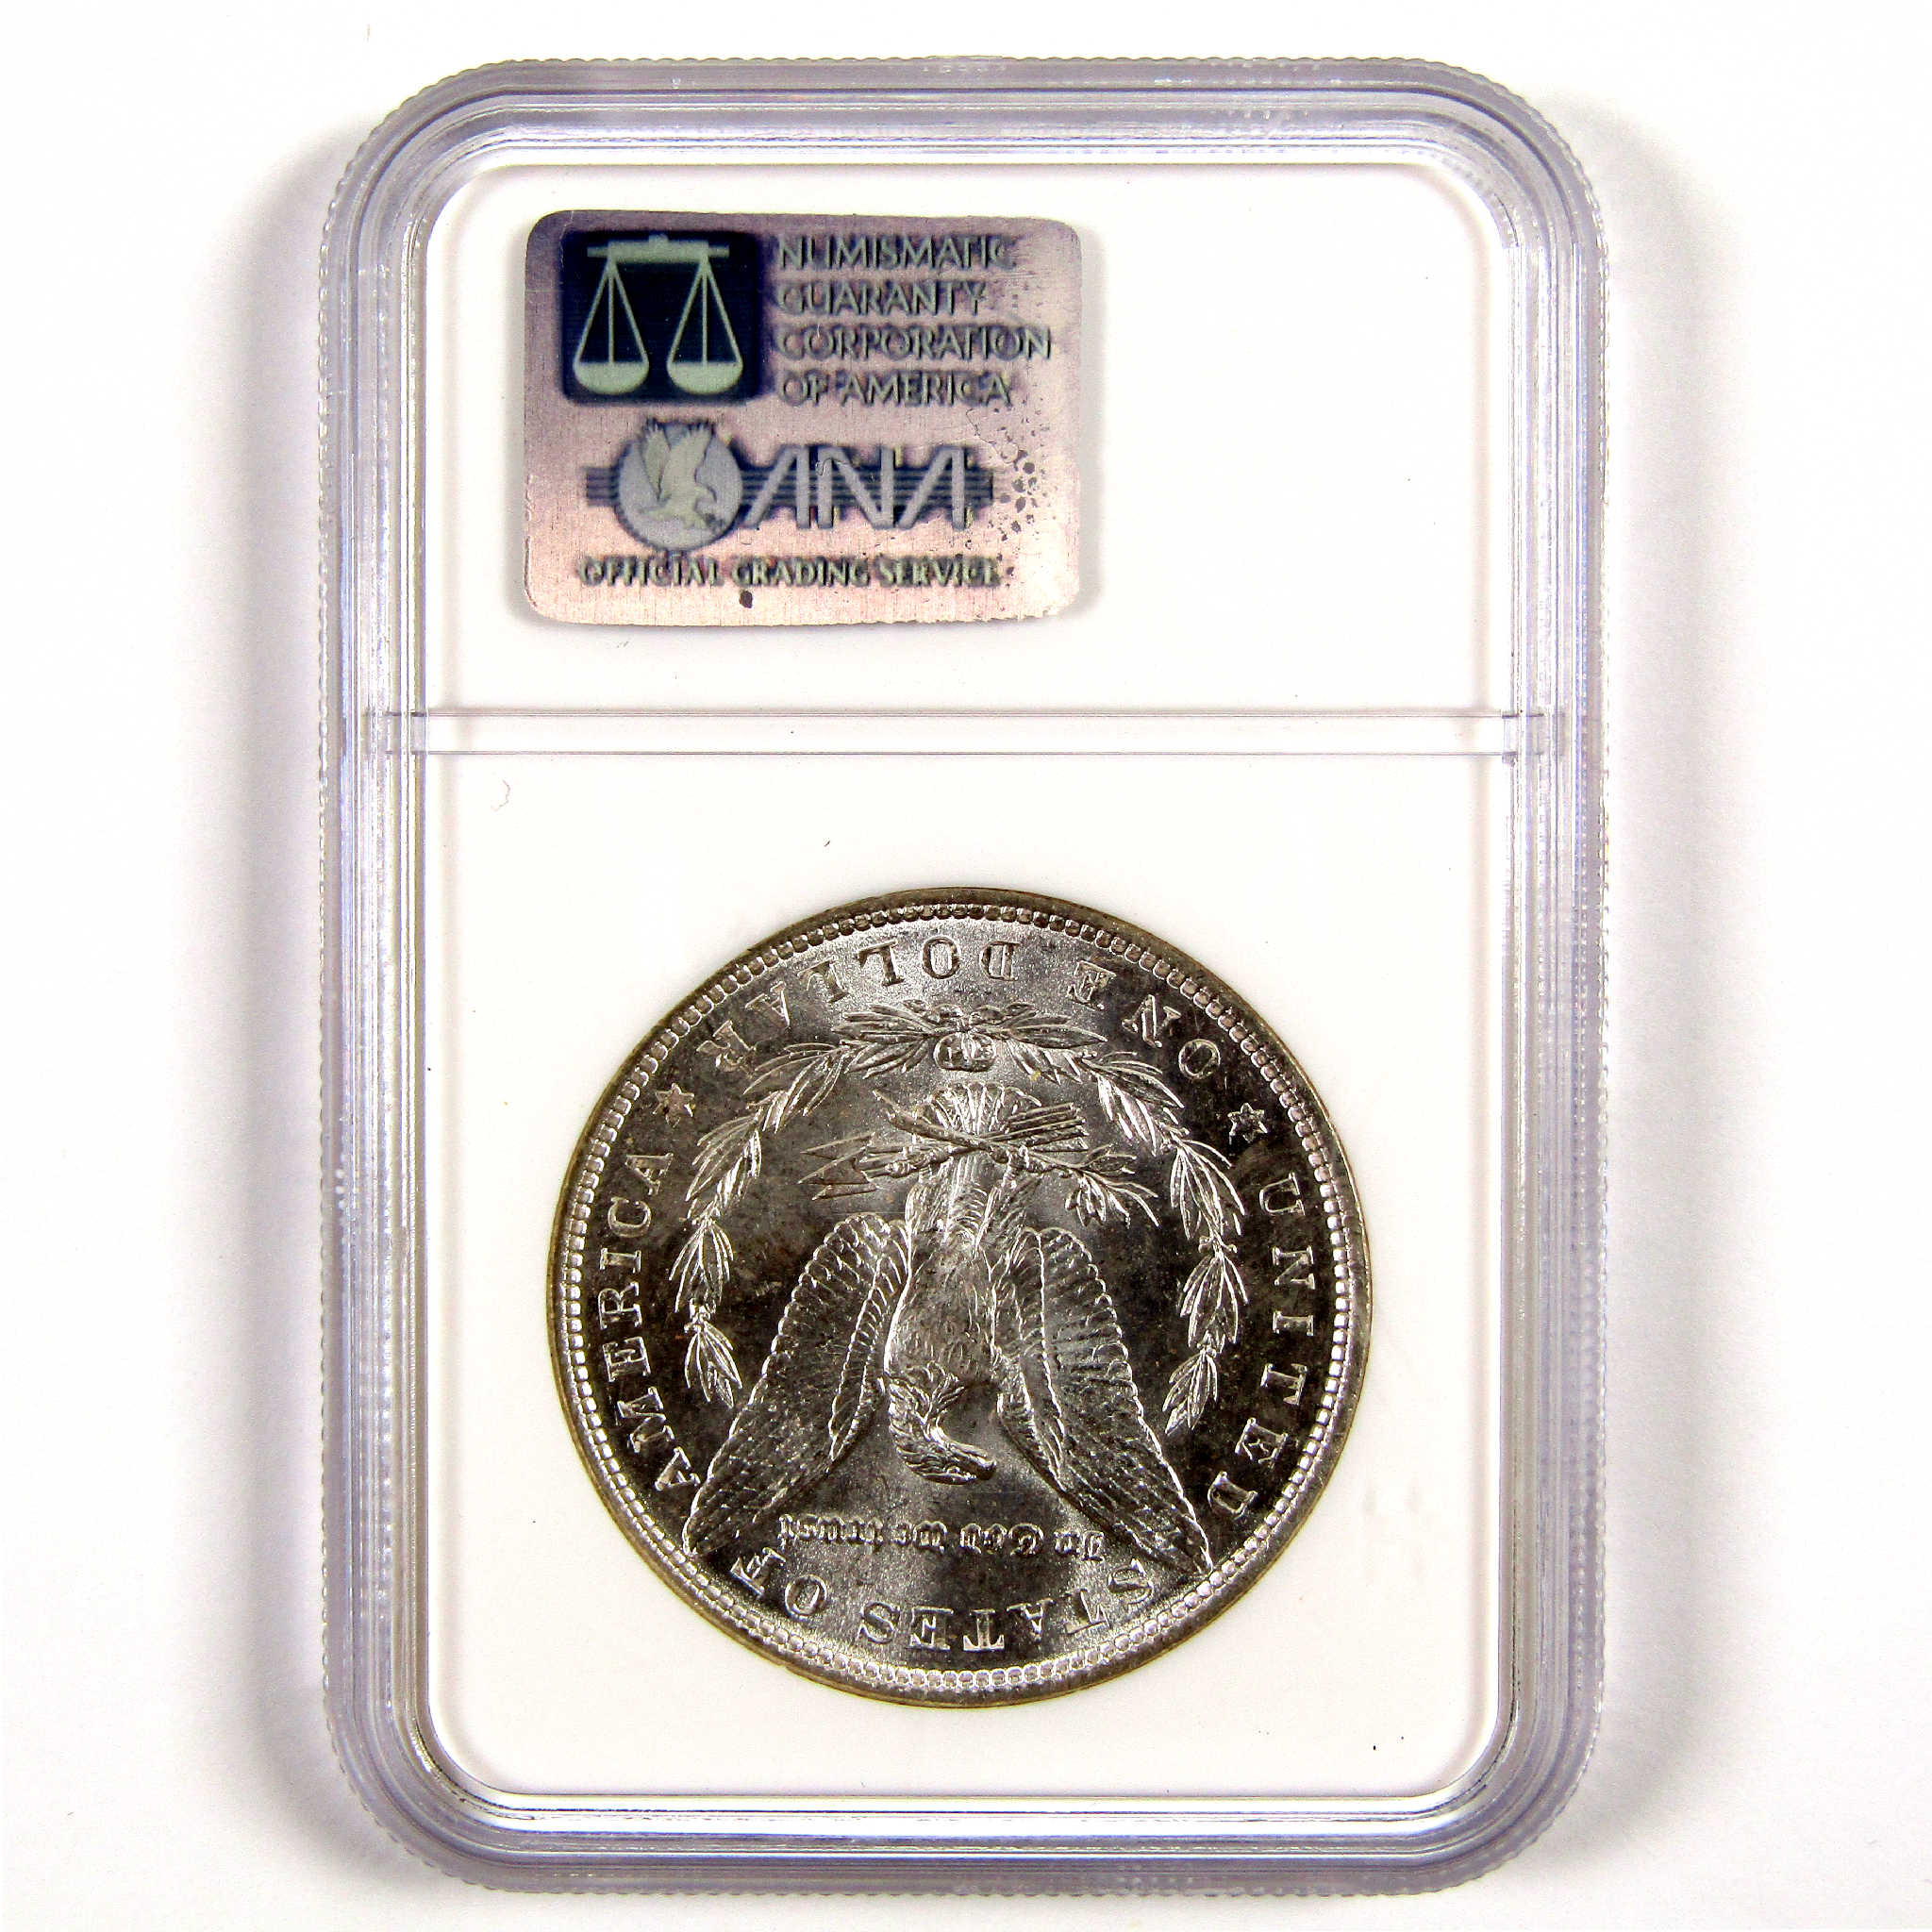 1886 Morgan Dollar MS 65 NGC Silver $1 Uncirculated Coin SKU:CPC6237 - Morgan coin - Morgan silver dollar - Morgan silver dollar for sale - Profile Coins &amp; Collectibles